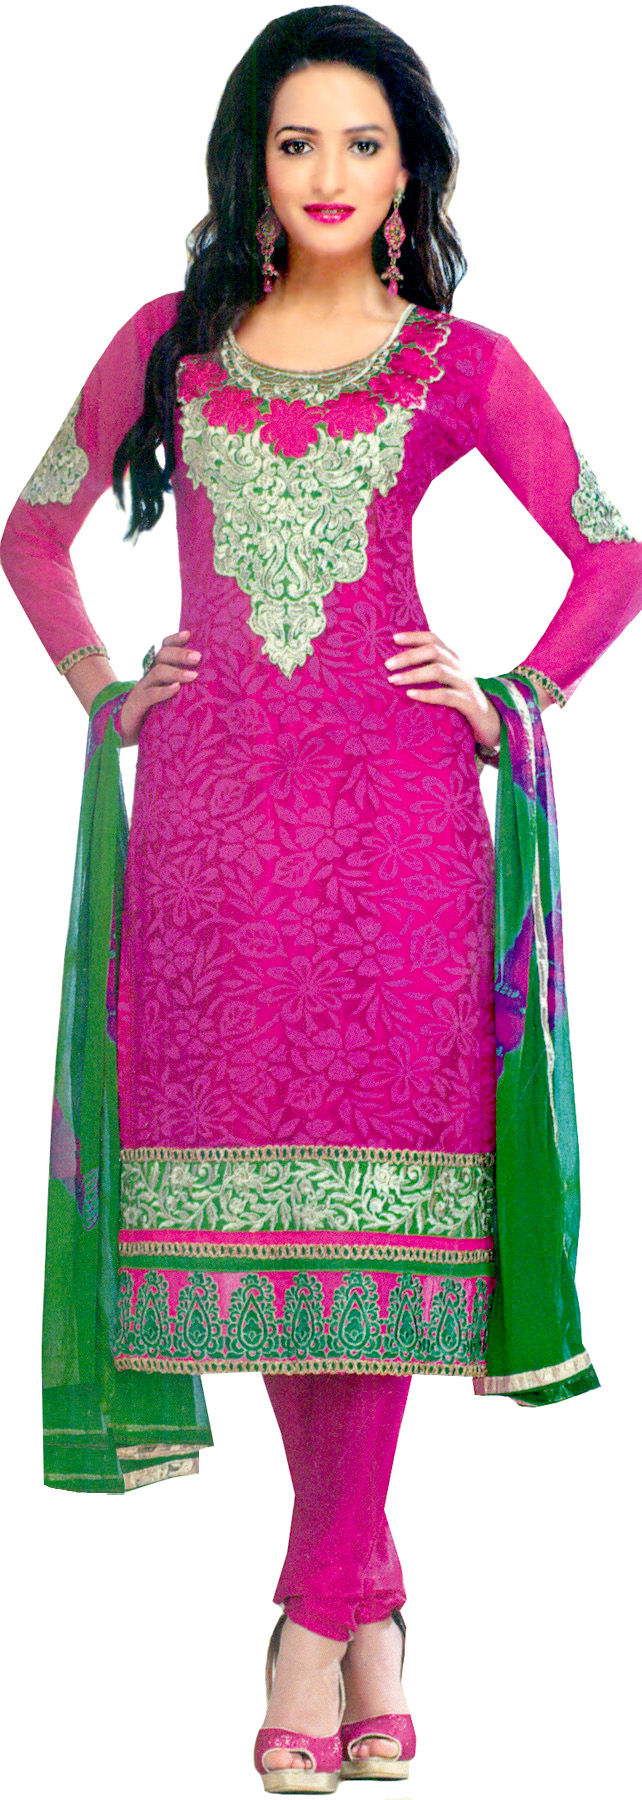 Raspberry-Rose Chudidar Kameez Suit with Floral Weave in Self and ...